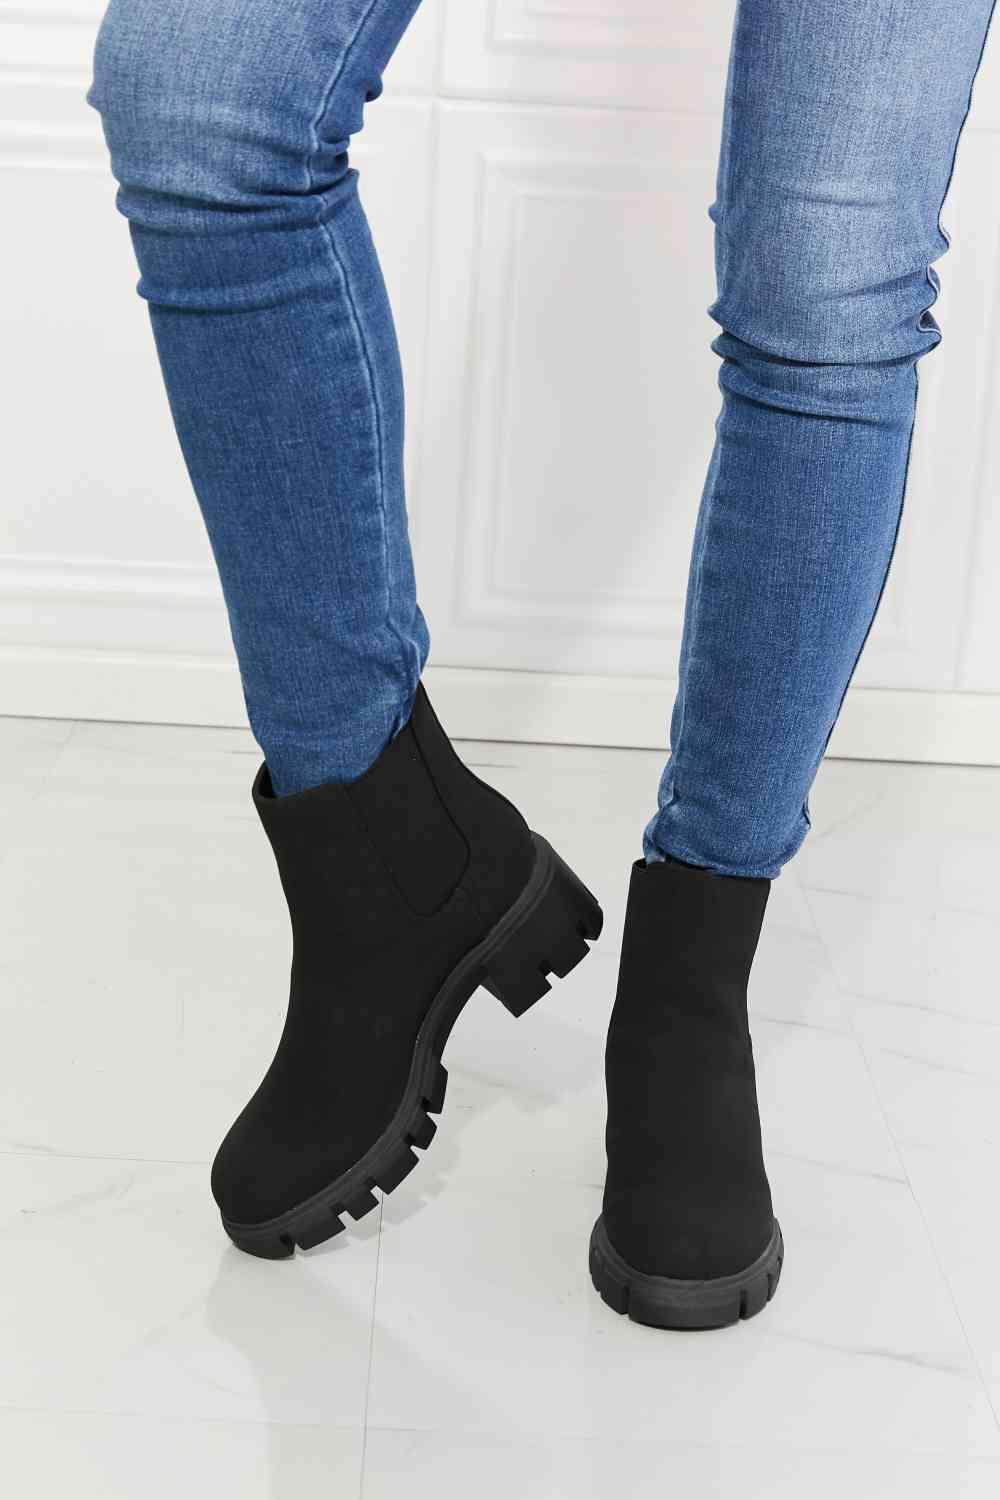 MMShoes Work For It Matte Lug Sole Chelsea Boots in Black - Lab Fashion, Home & Health